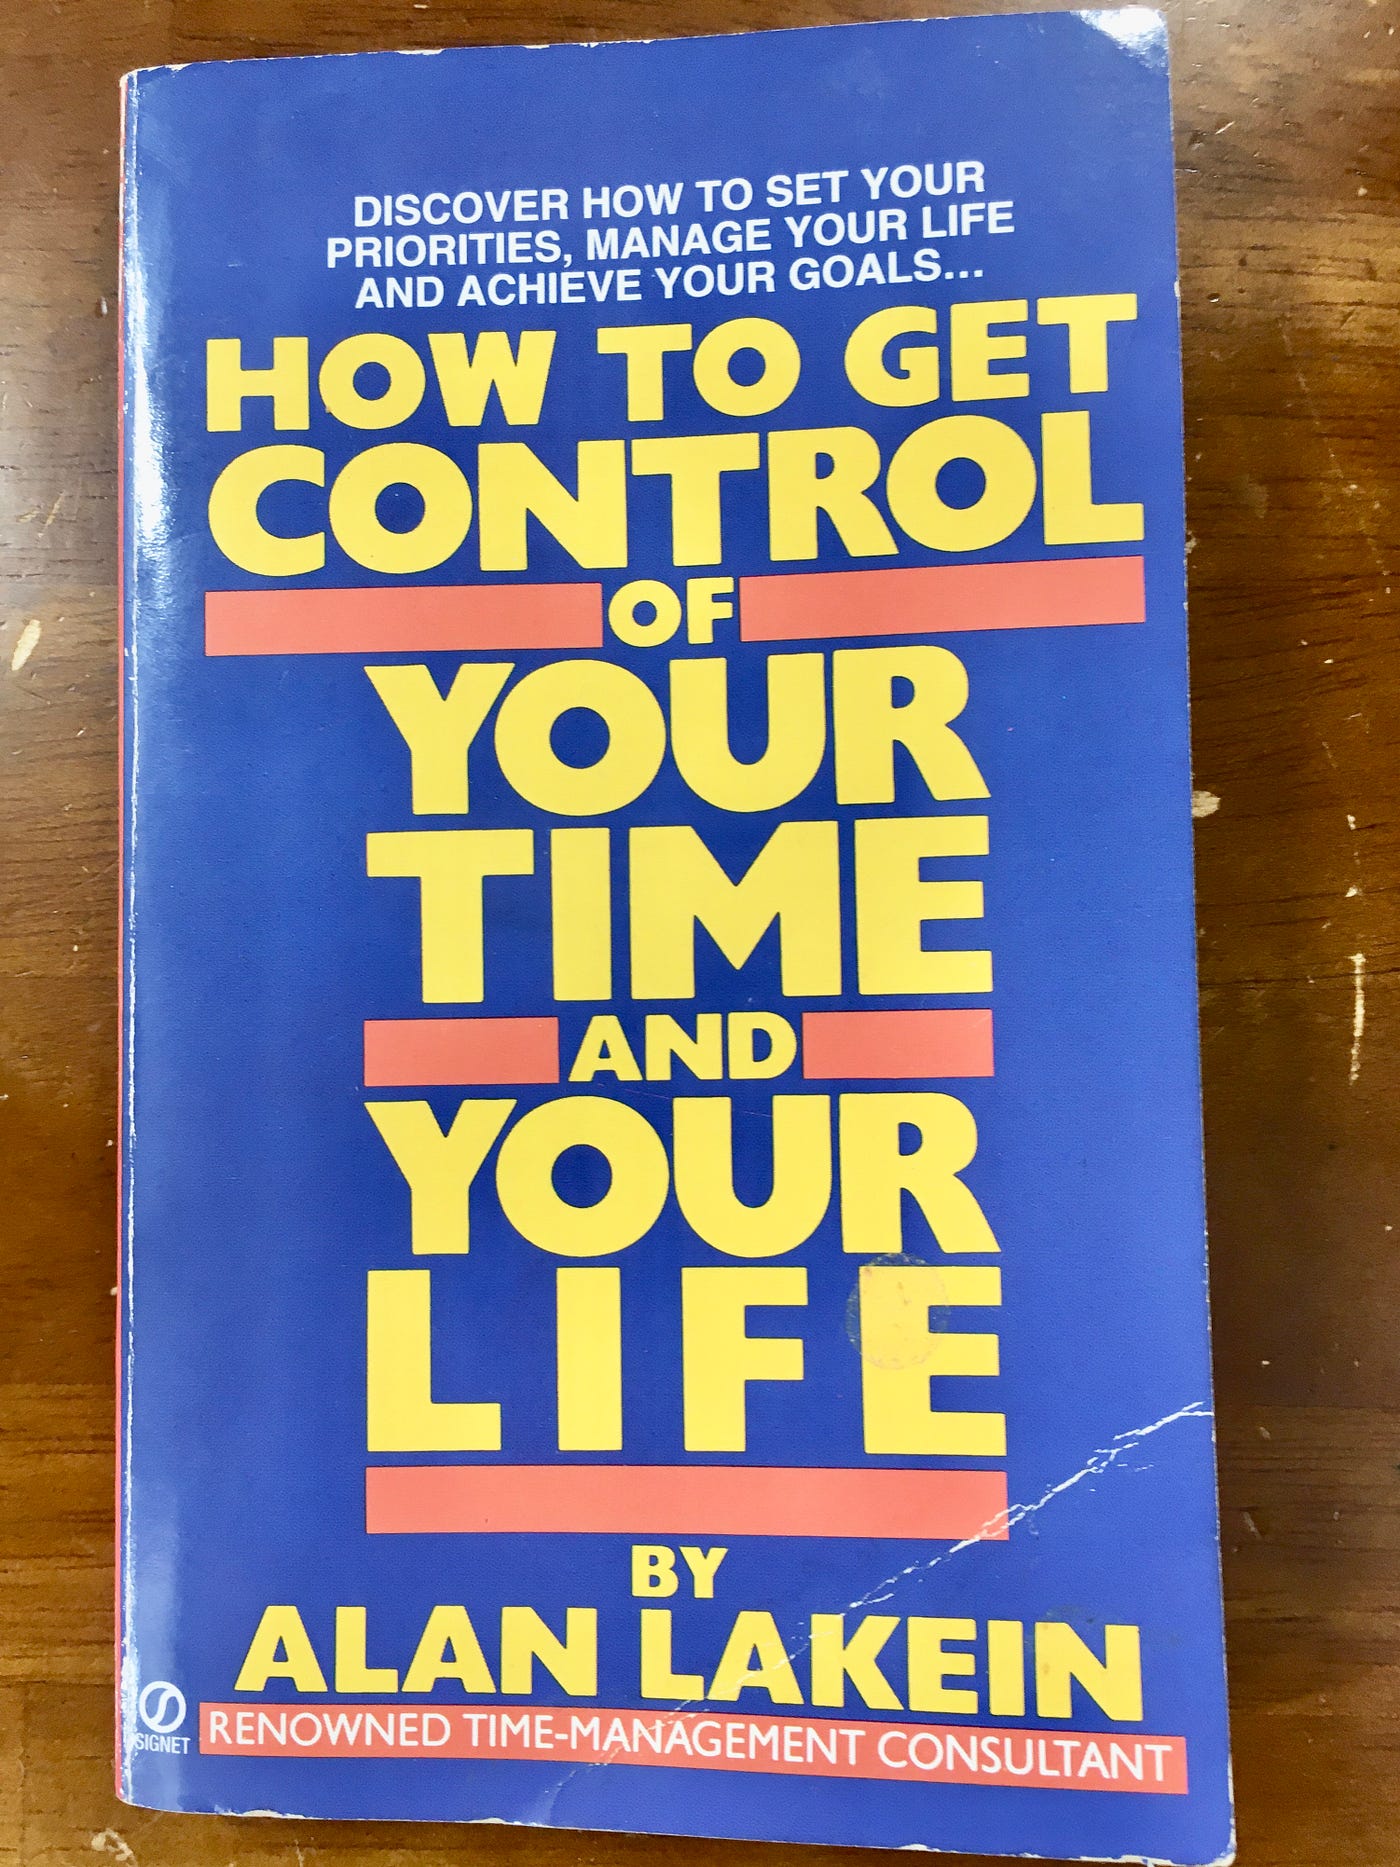 The Only 2 Ways to Be in Control of Your Time